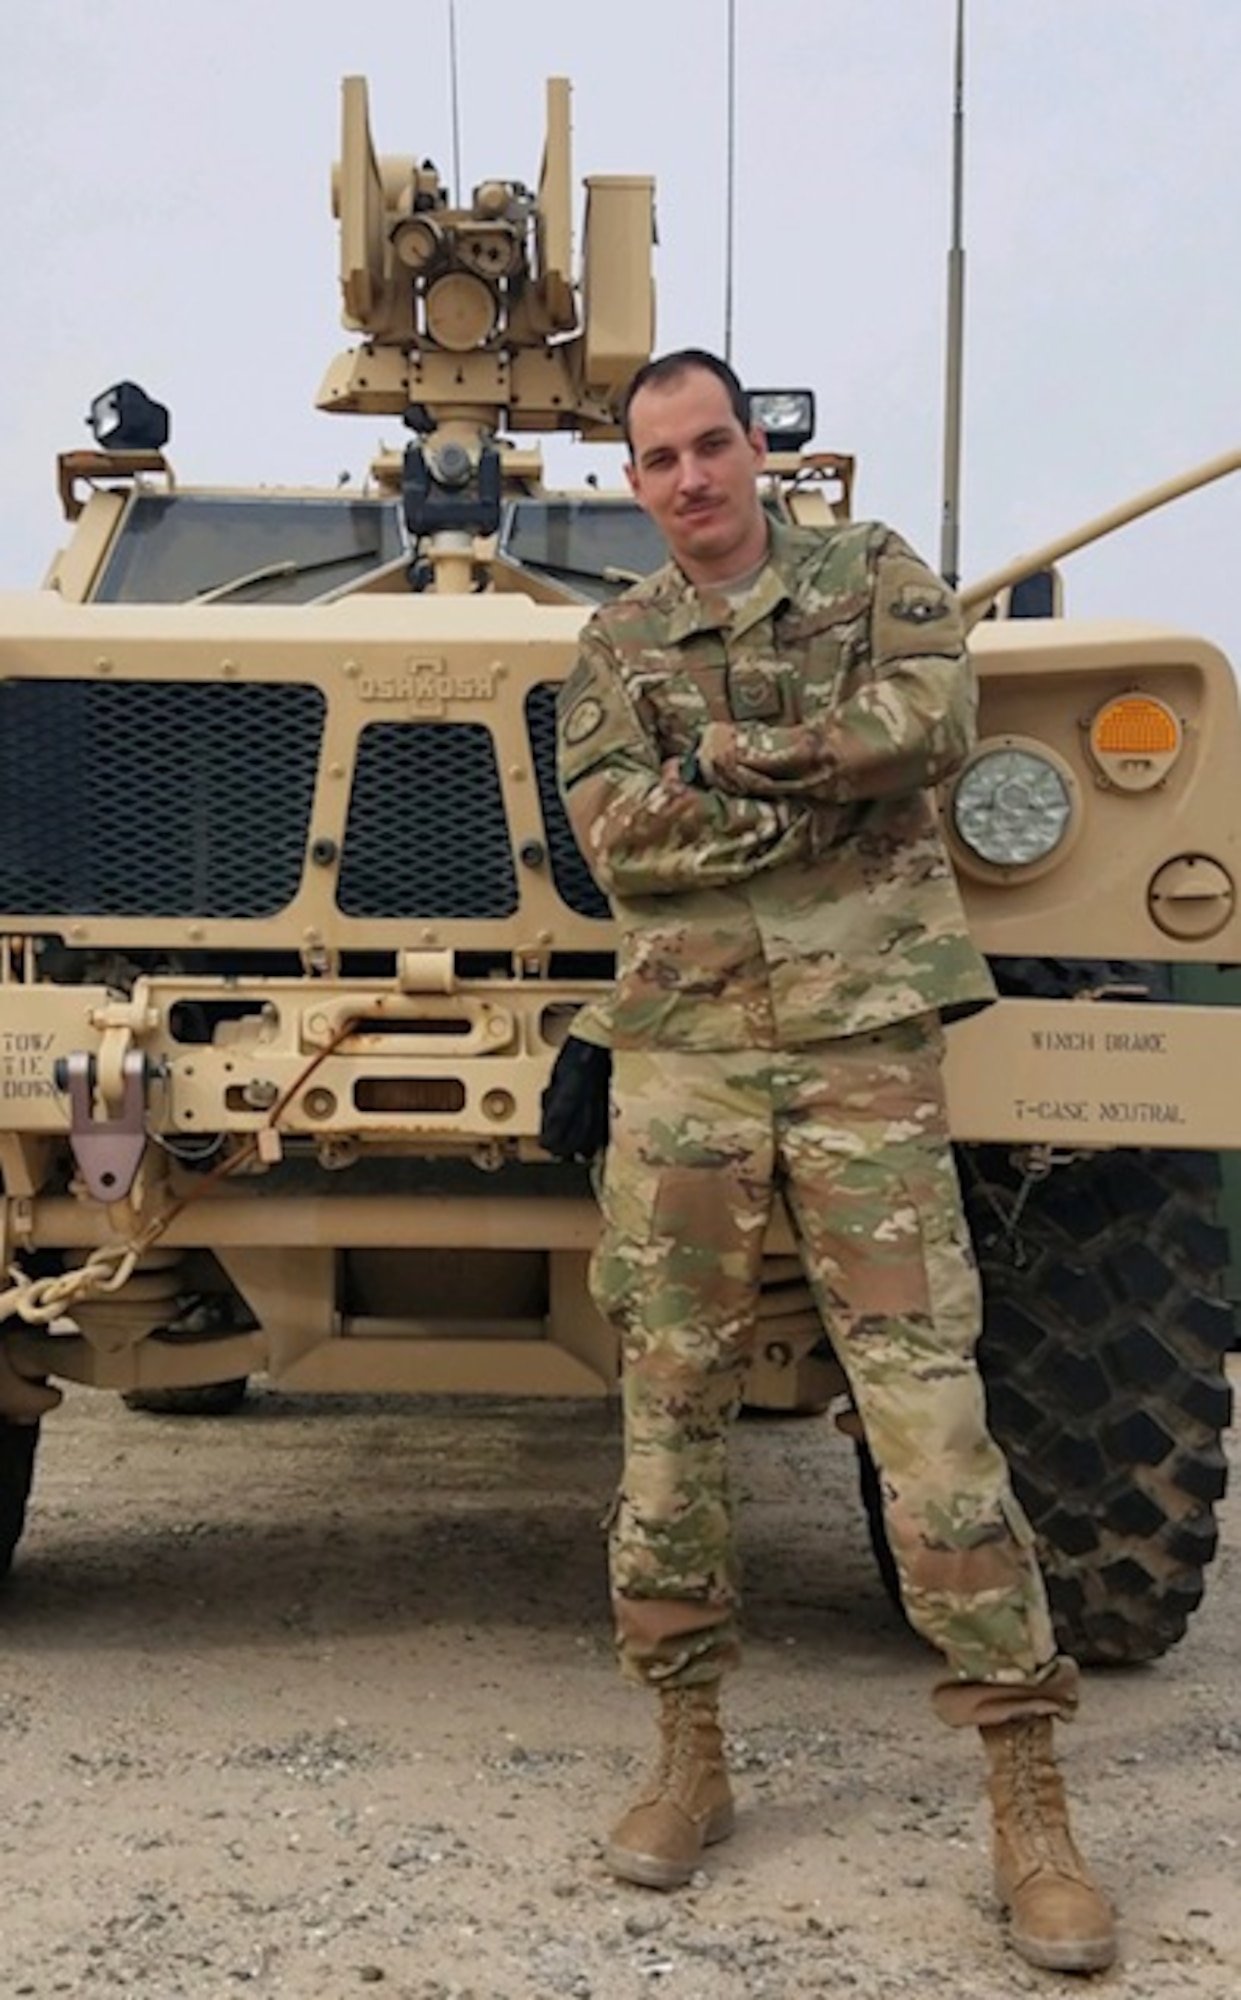 U.S. Air Force Reserve Staff Sgt. Kevin Mailhiot poses in front of a Mine-Resistant Ambush Protected vehicle while deployed to an undisclosed location in Southeast Asia. He is one of four siblings assigned to Little Rock Air Force Base. (Courtesy photo)